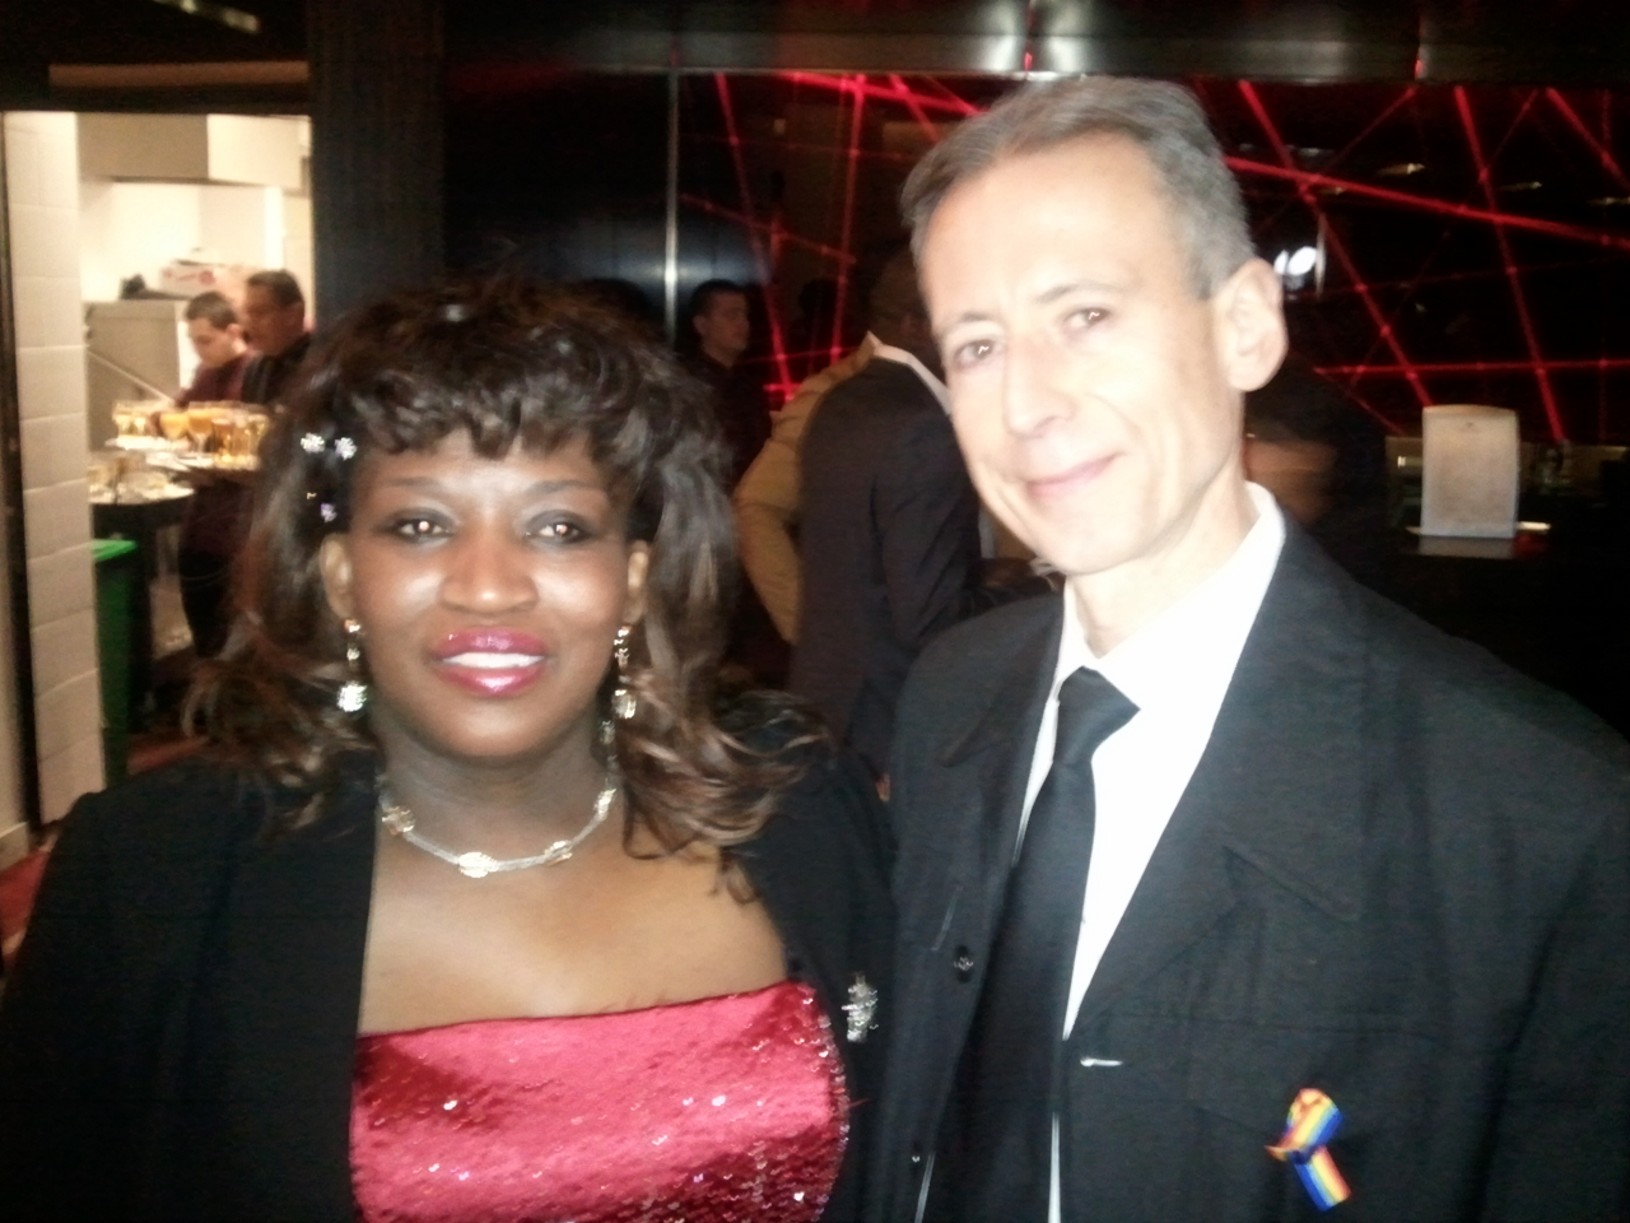 With Peter Tatchell @Screen nations Film & T.v Awards 2013